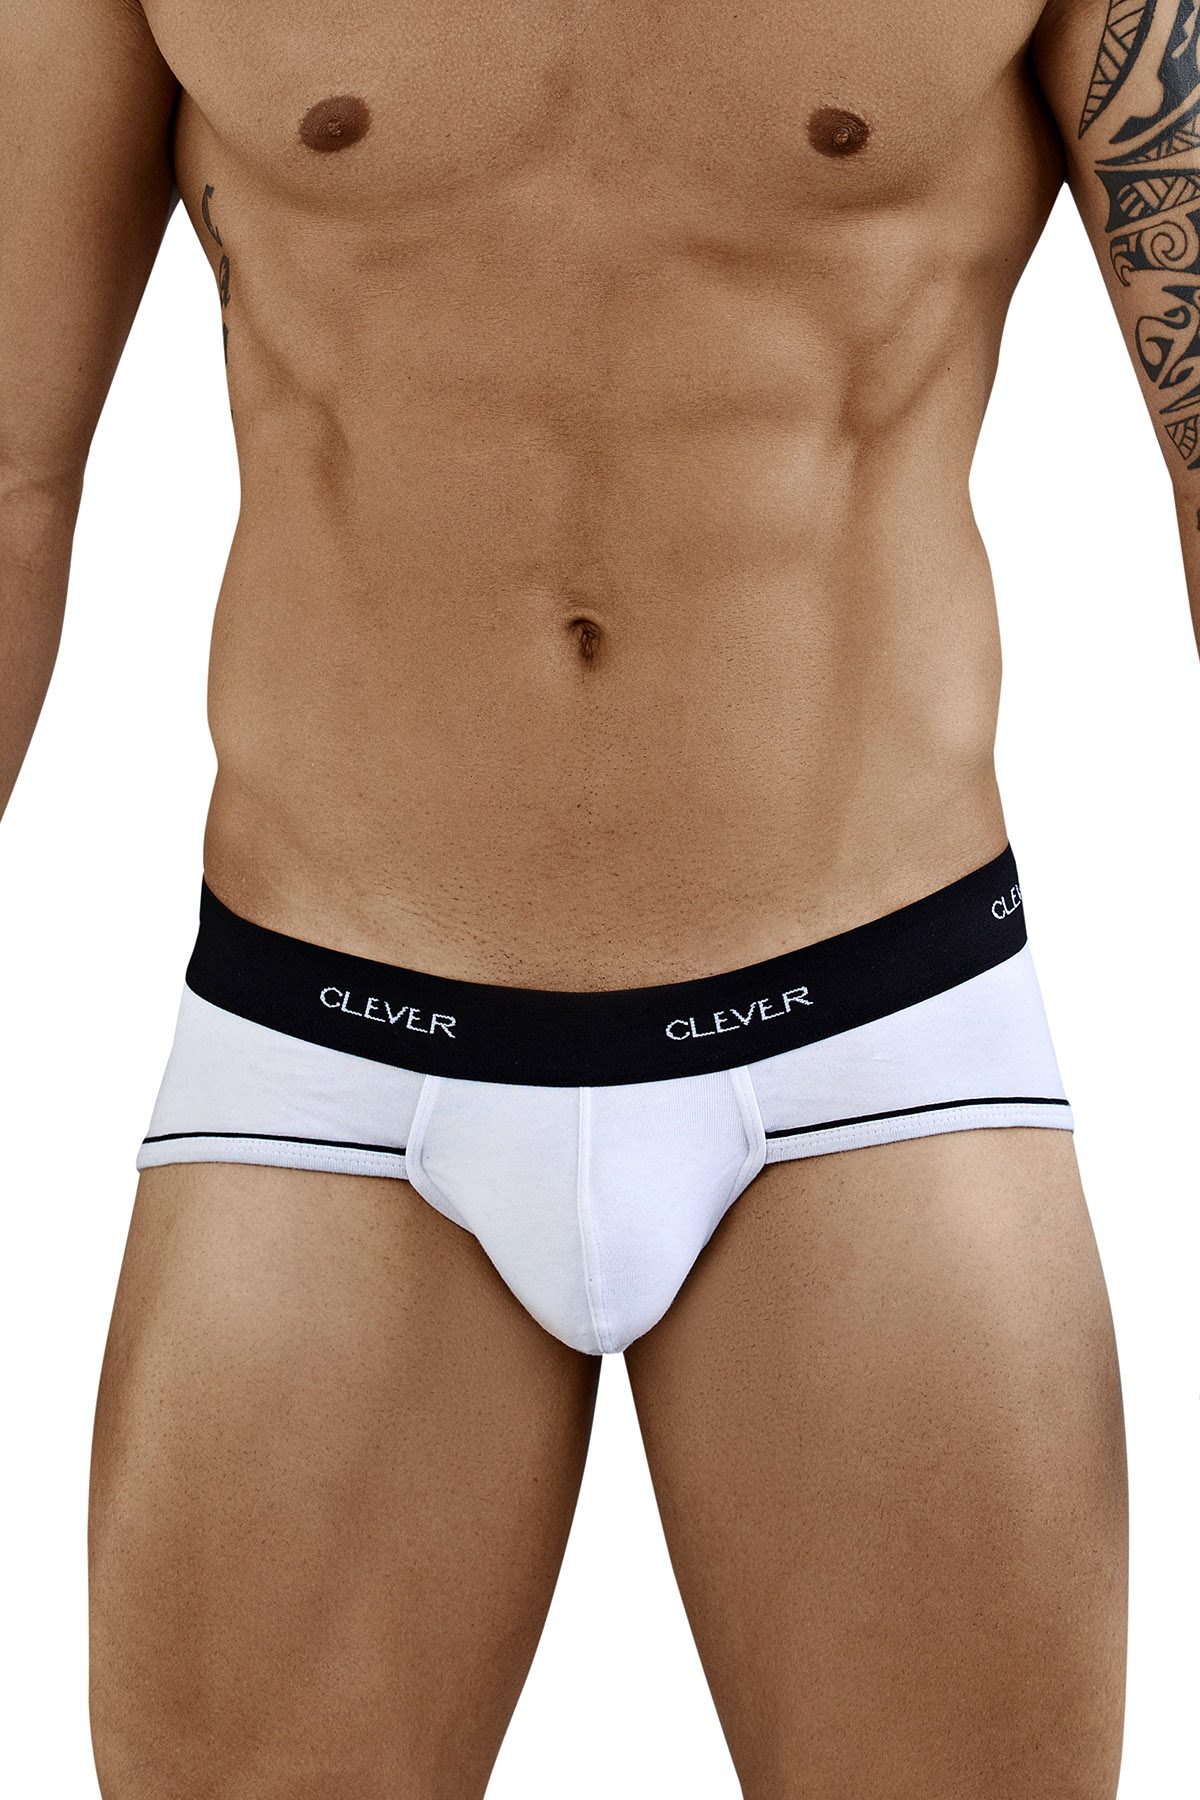 Clever White Alpine Piping Brief